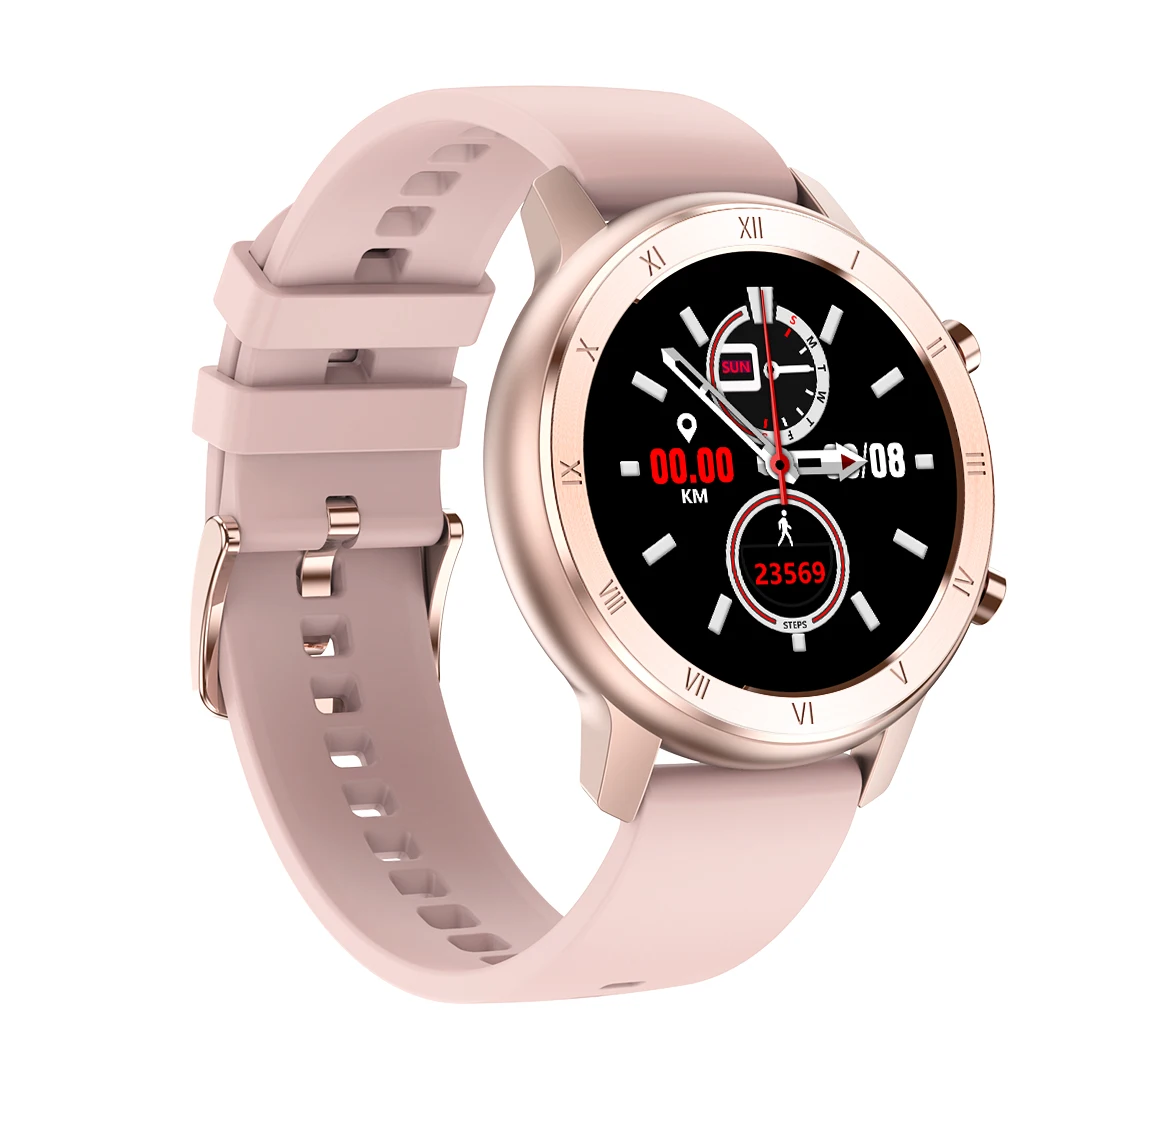 

Ladies style DT89 smart watch Female physiological monitoring call reminder wristwatches fitness sports android smartwatch dt89